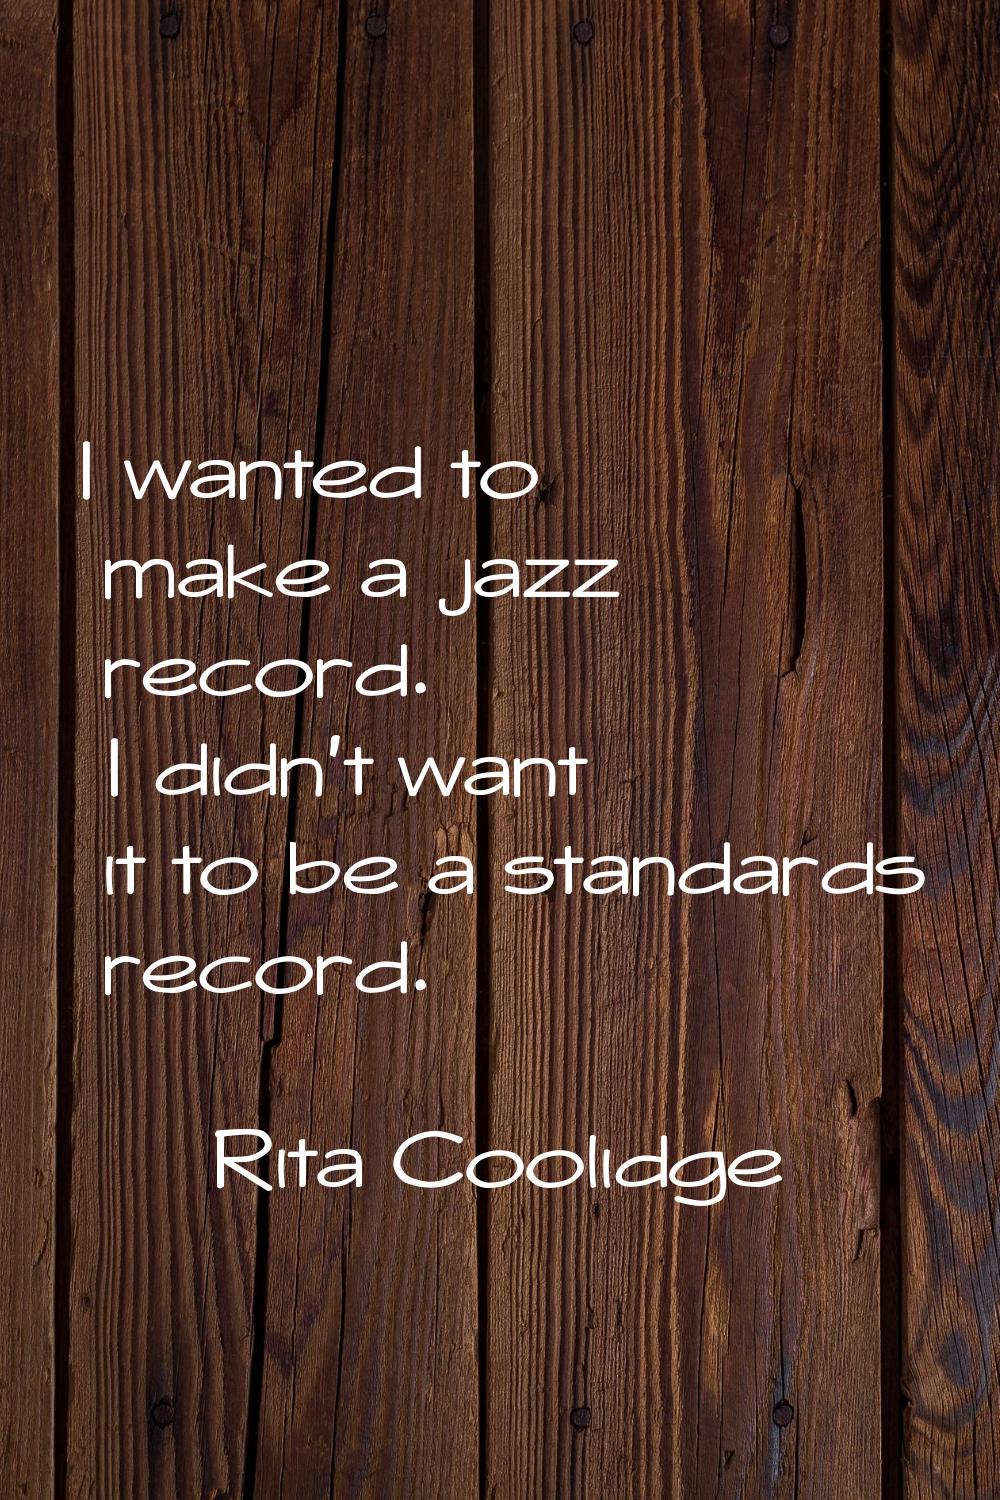 I wanted to make a jazz record. I didn't want it to be a standards record.